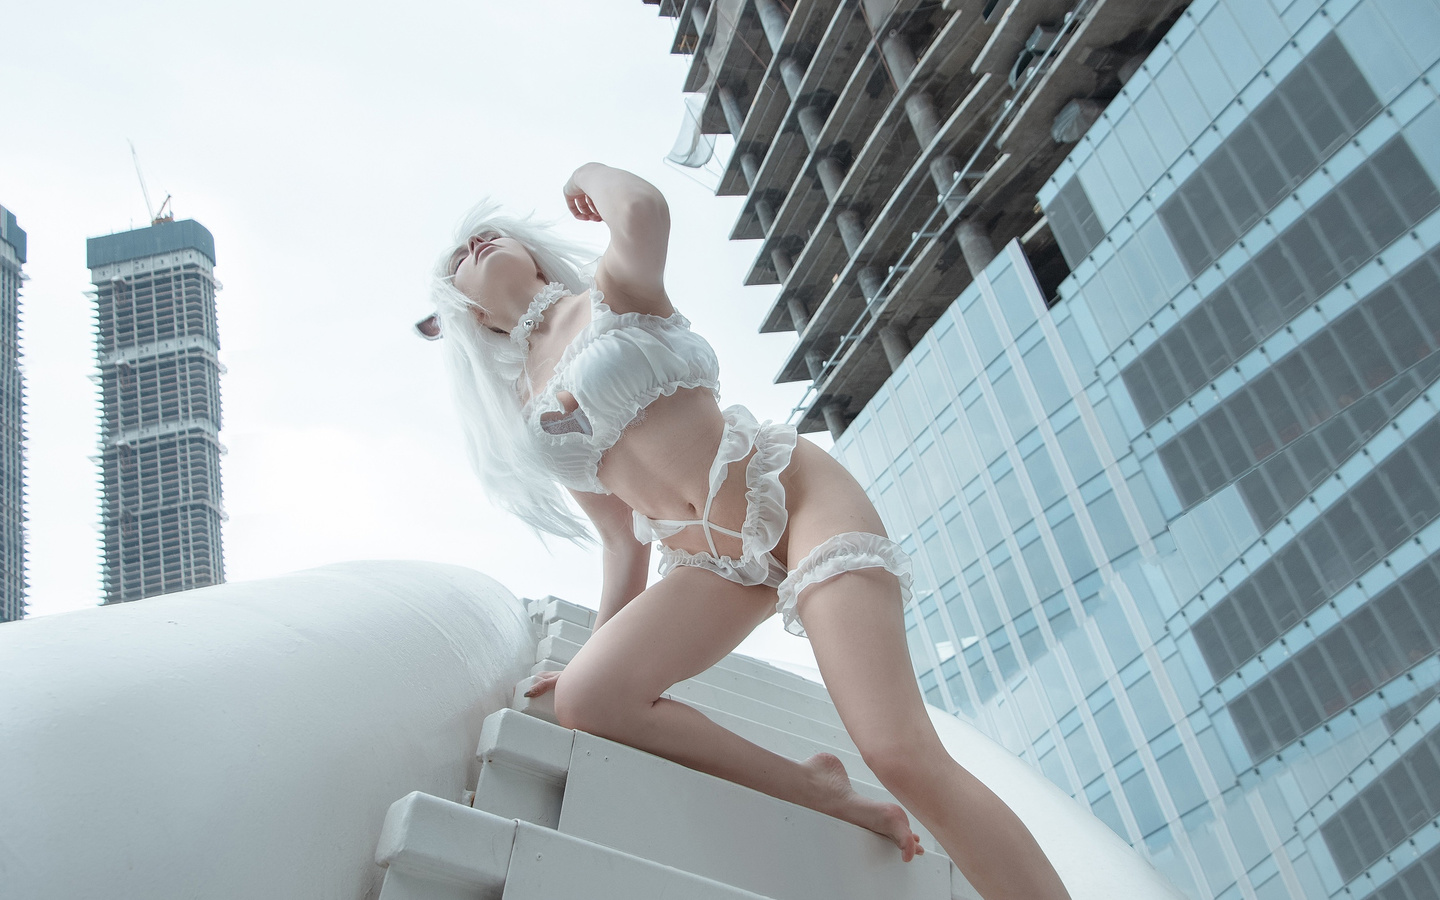 women, white lingerie, white hair, women outdoors, pale, animal ears, building, belly, closed eyes, armpits